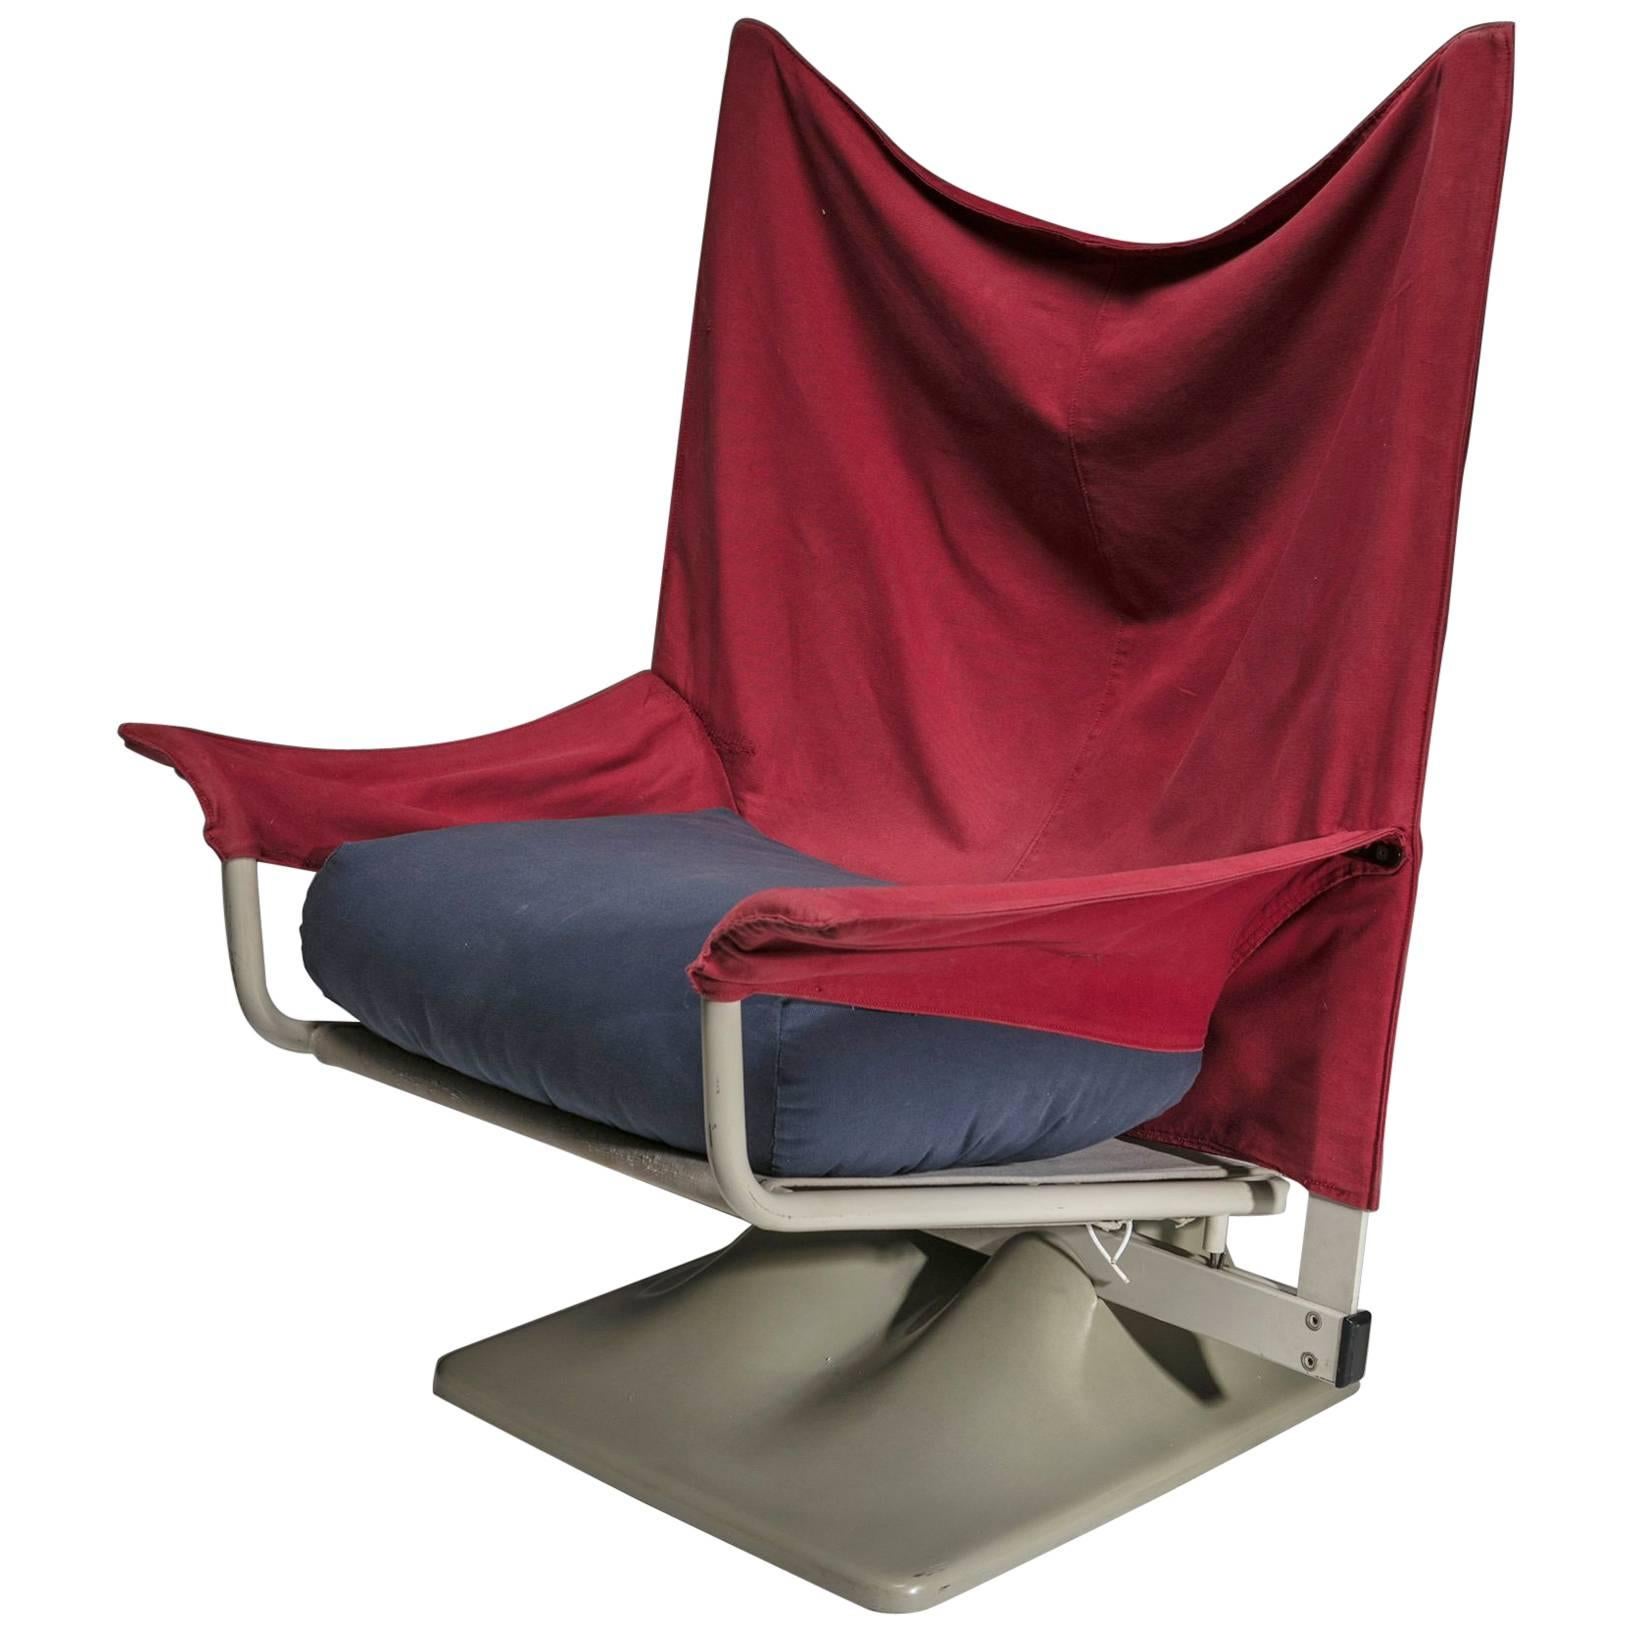 "Aeo" Lounge Chair by Archizoom for Cassina